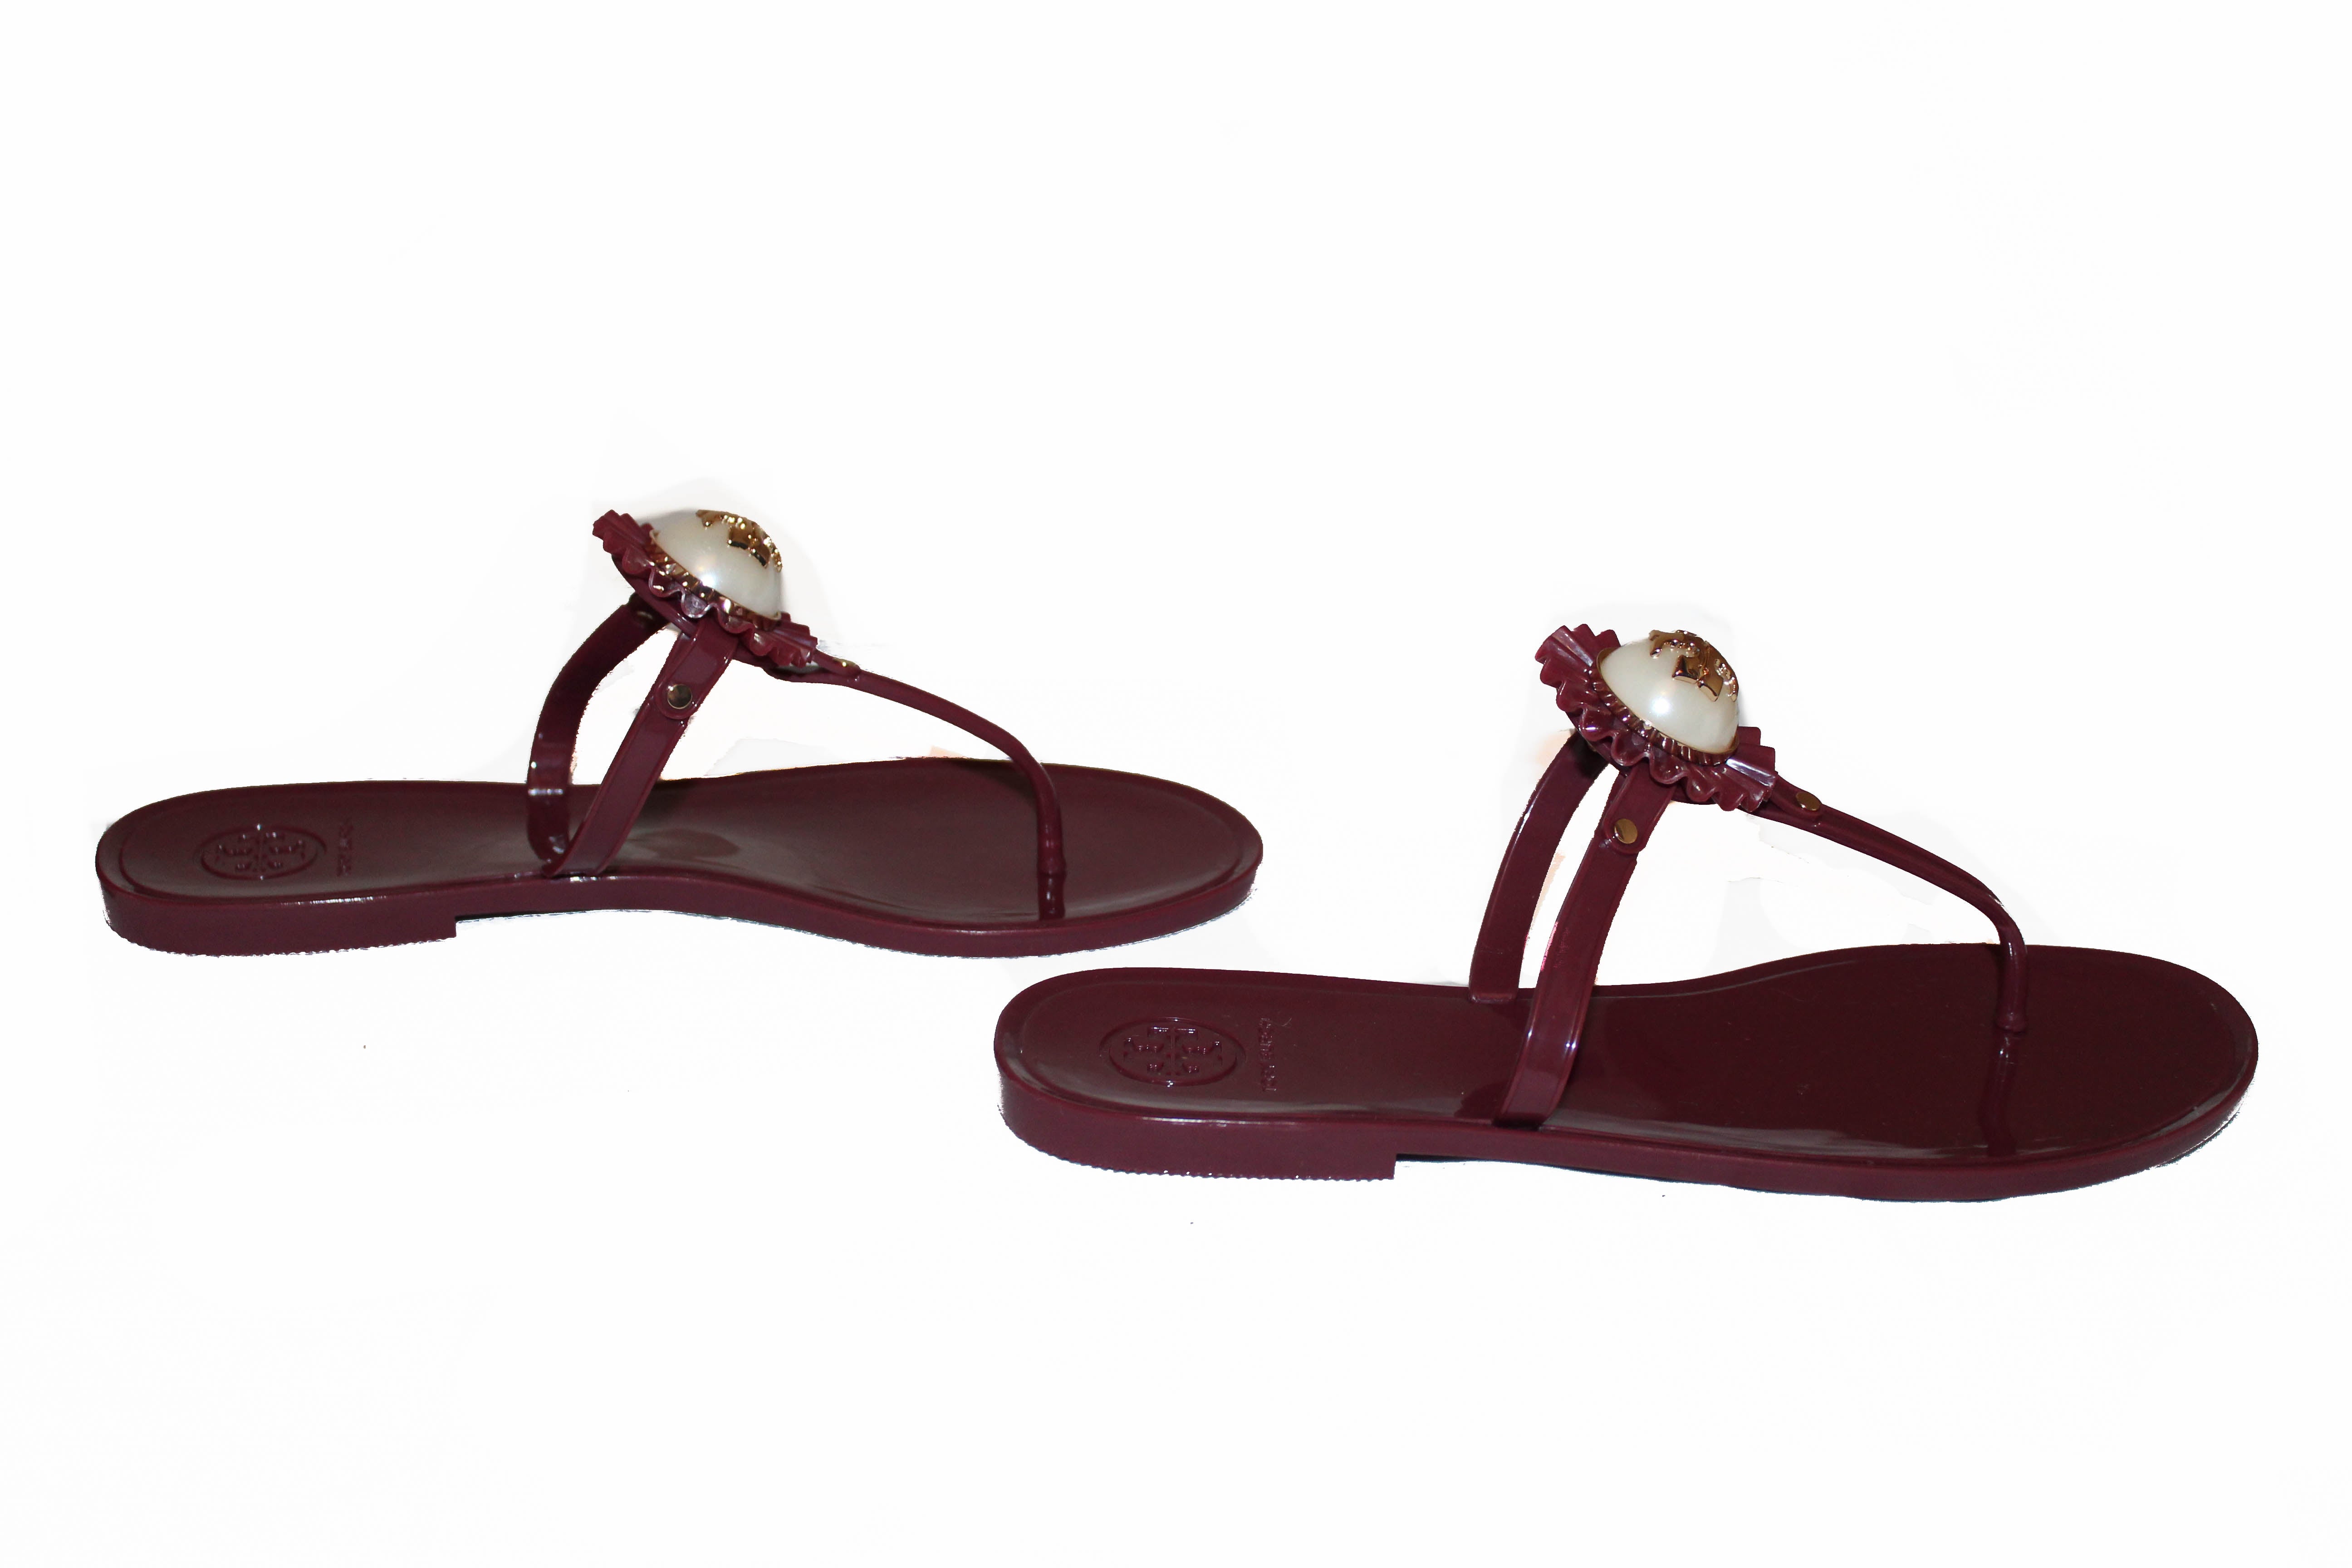 Discover more than 189 tory burch jelly sandals super hot